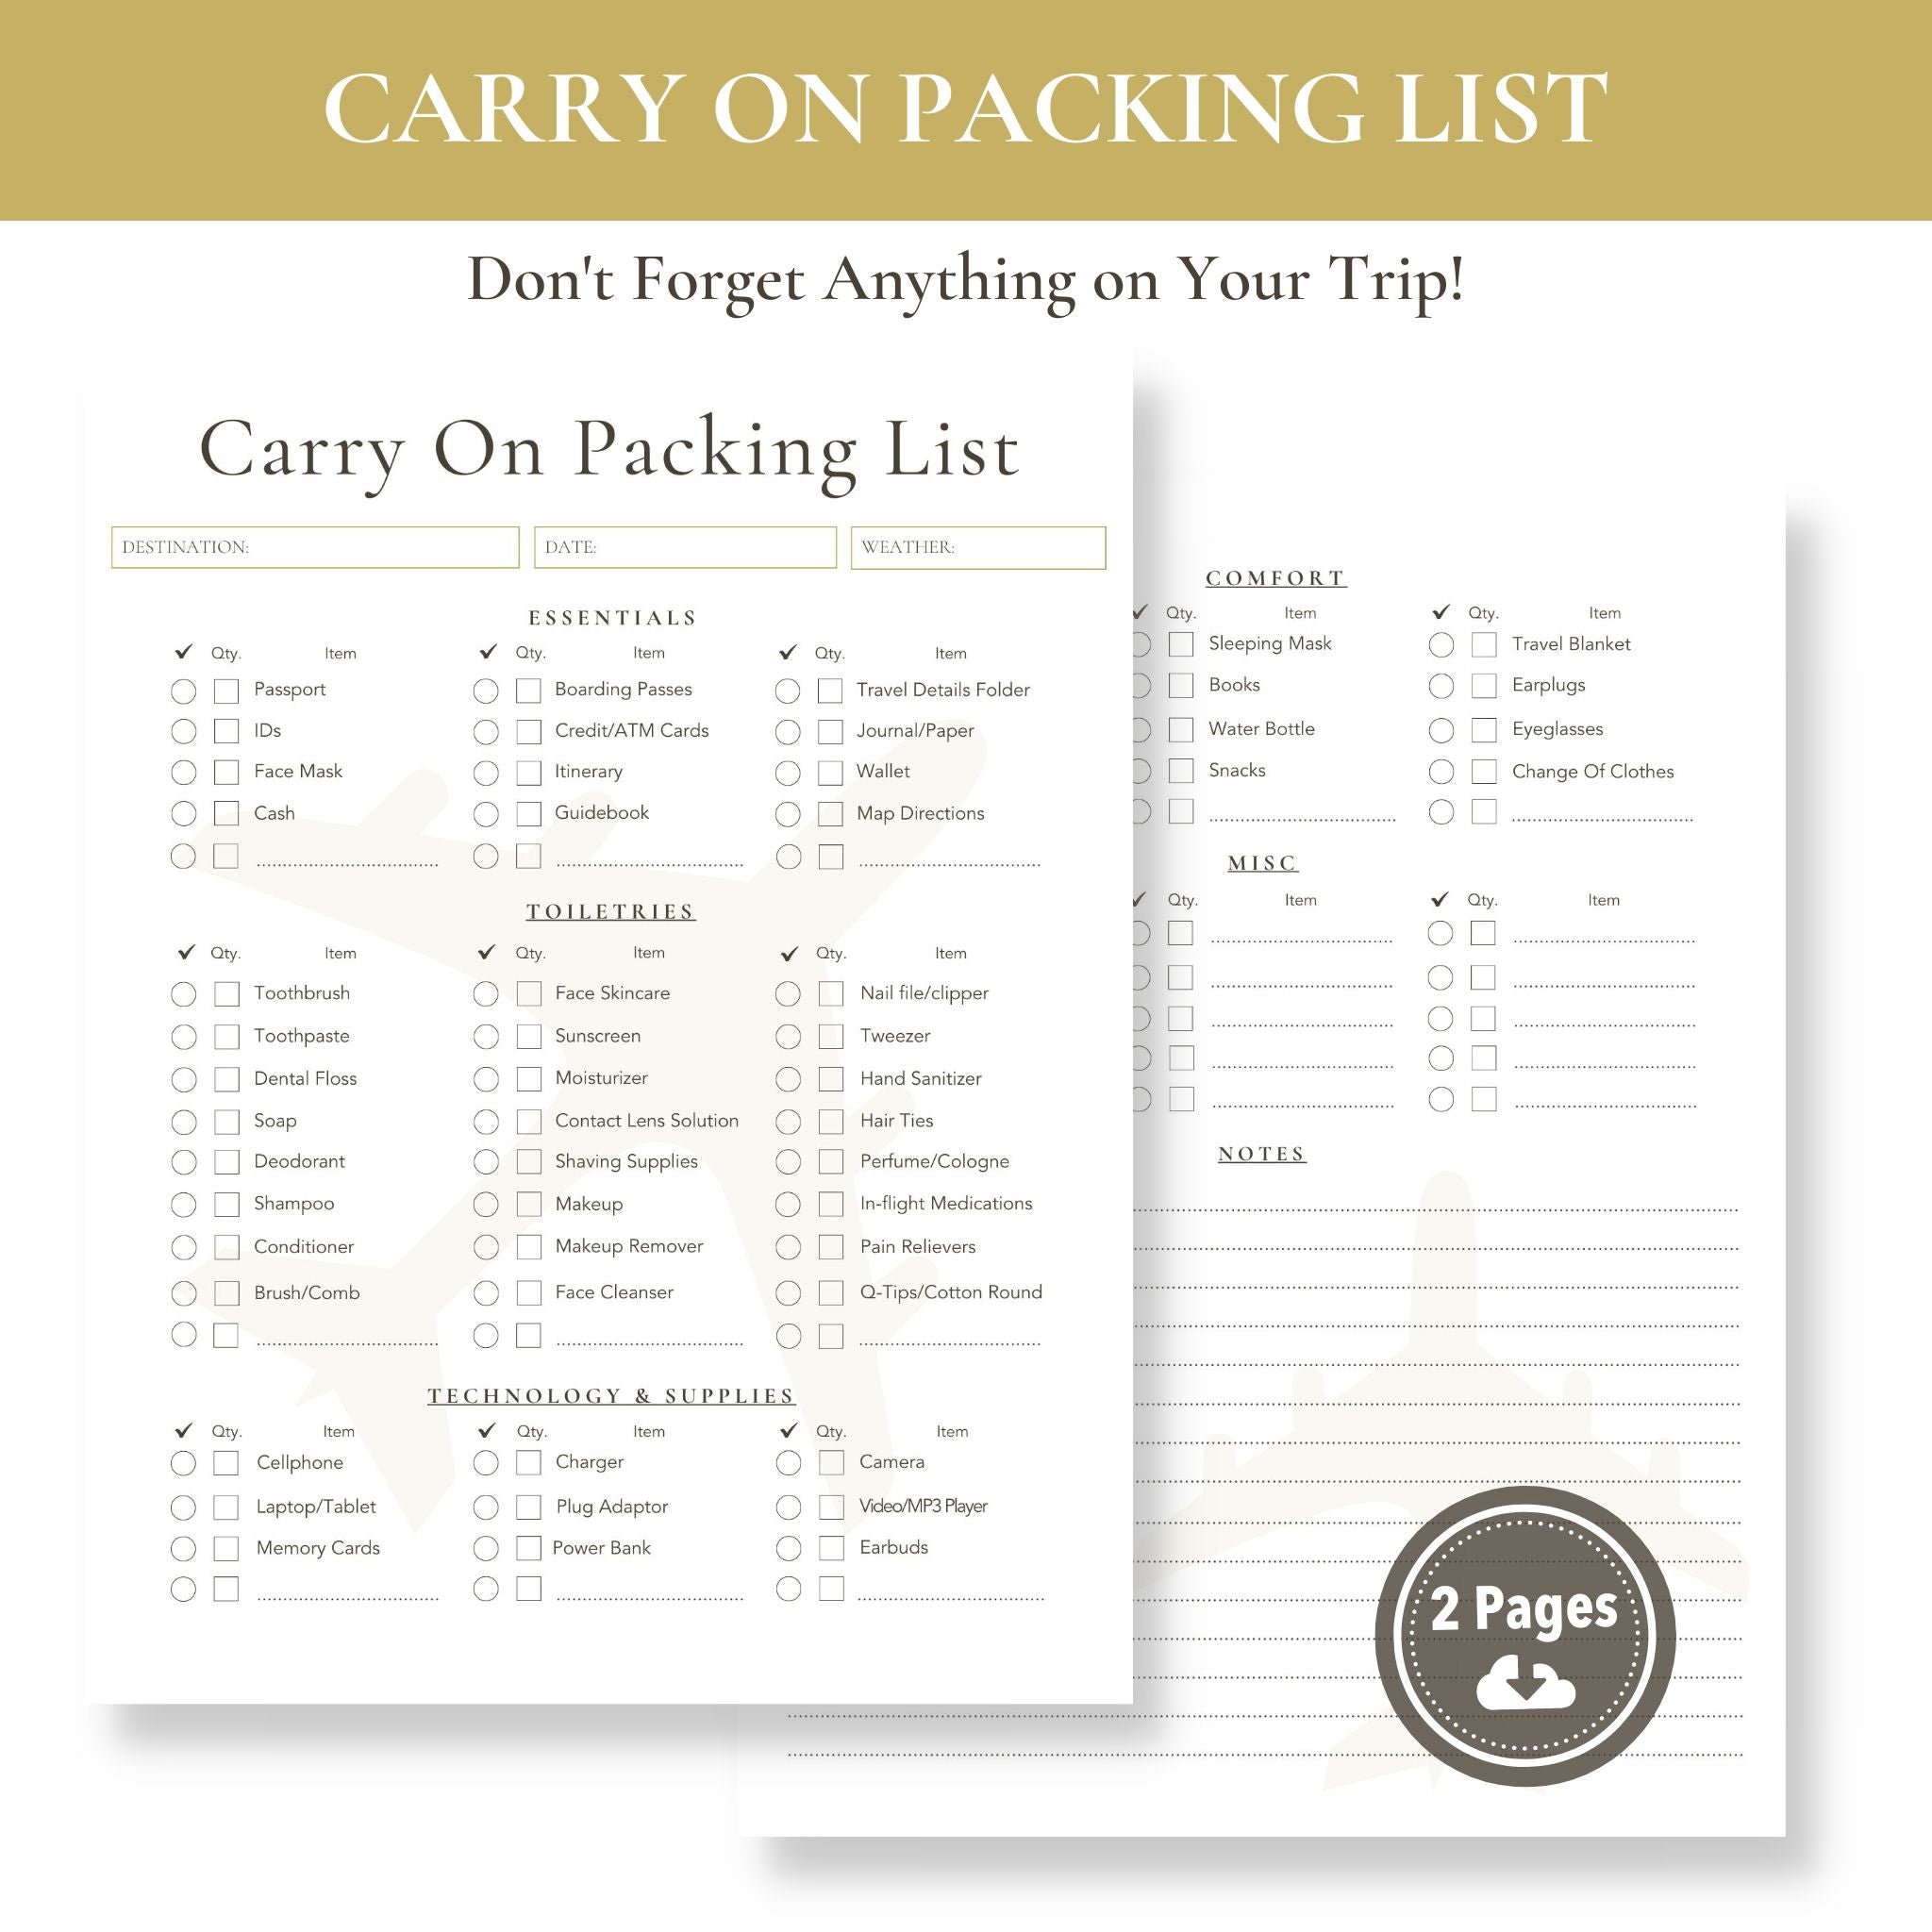 Ultimate Carry On Packing List Guide: Essential Must-Haves